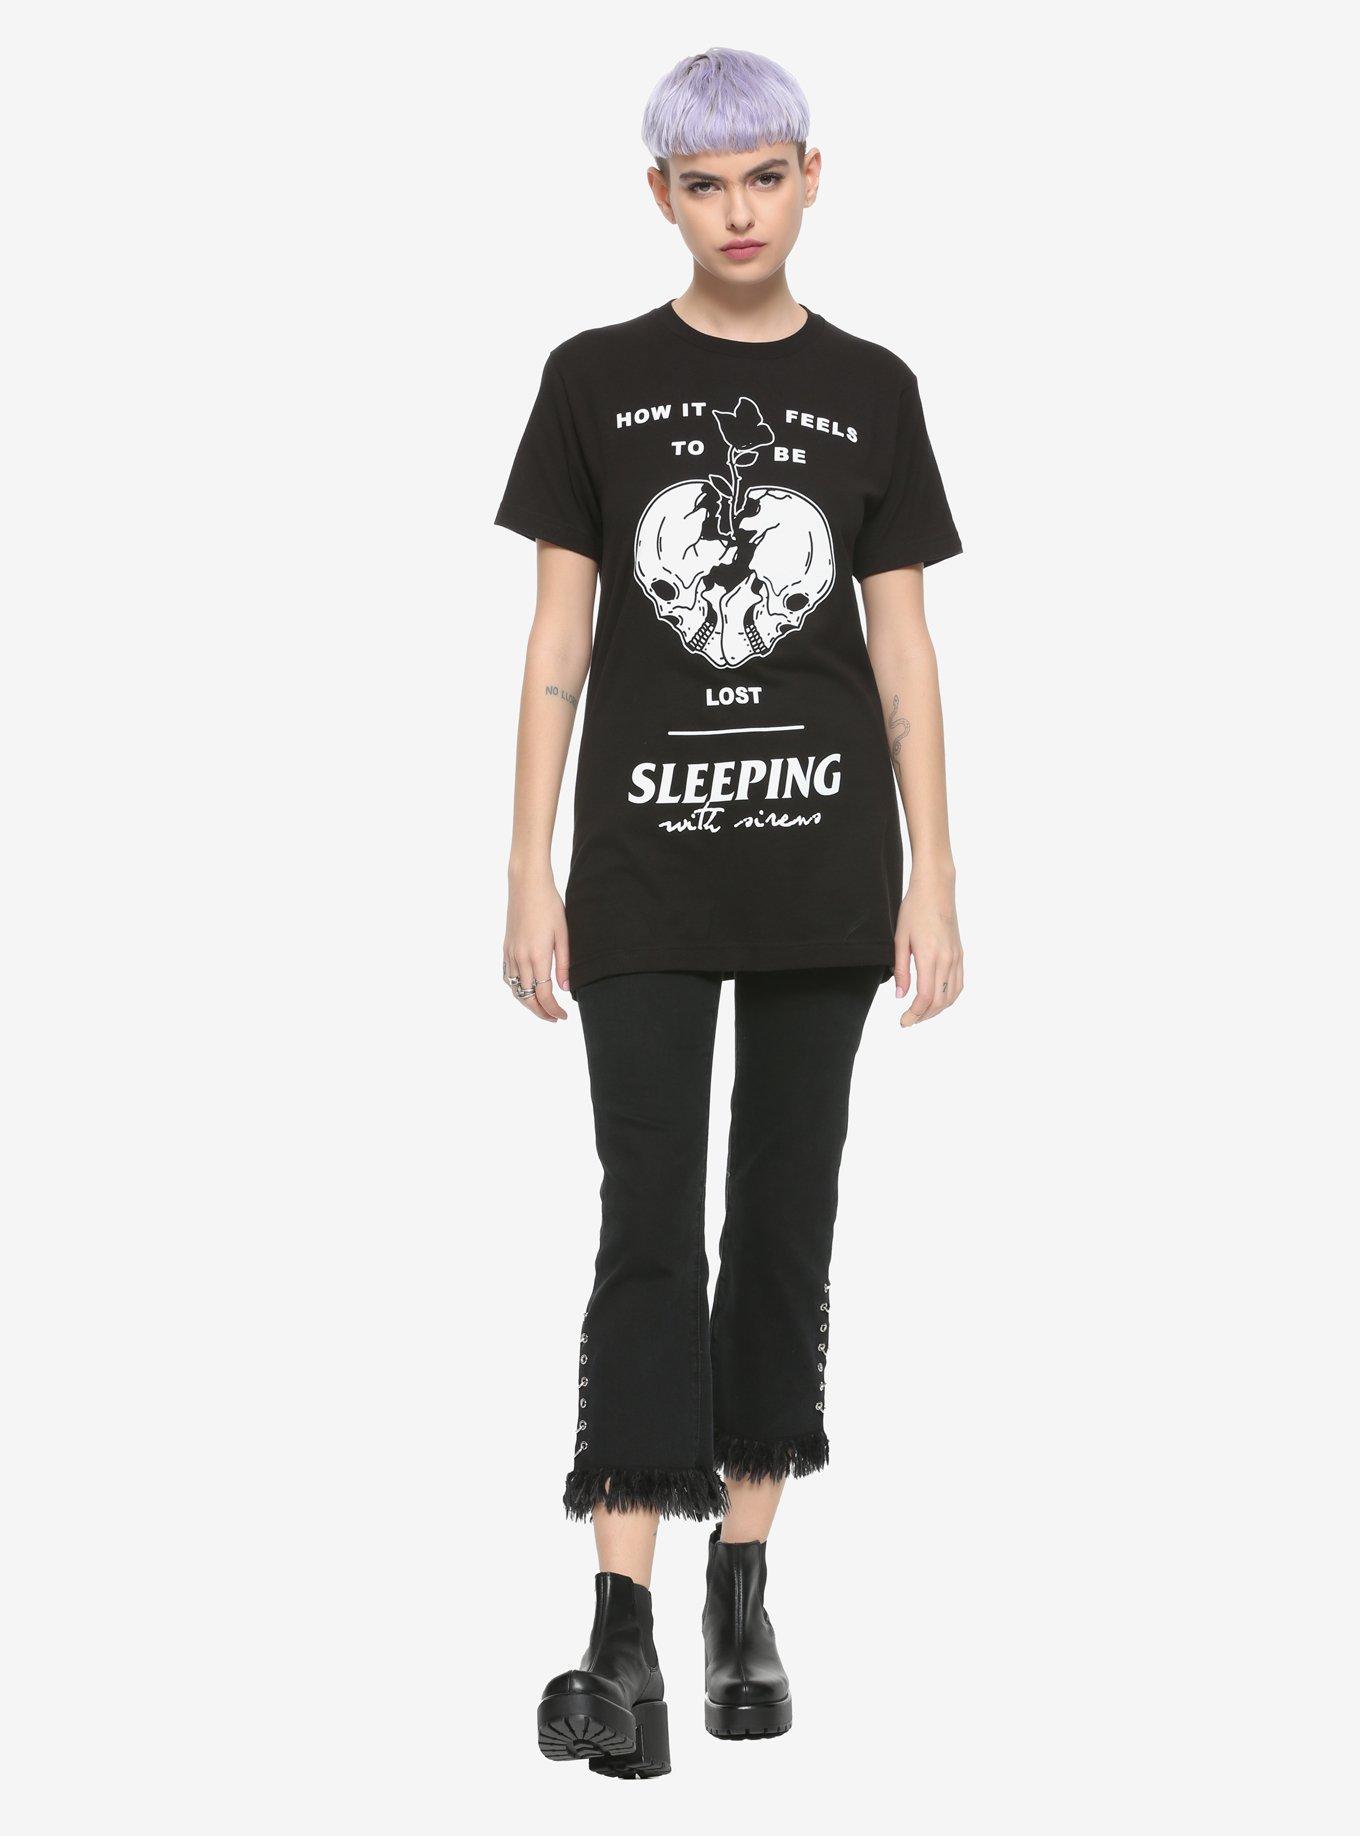 Sleeping With Sirens How It Feels To Be Lost Girls T-Shirt, BLACK, alternate